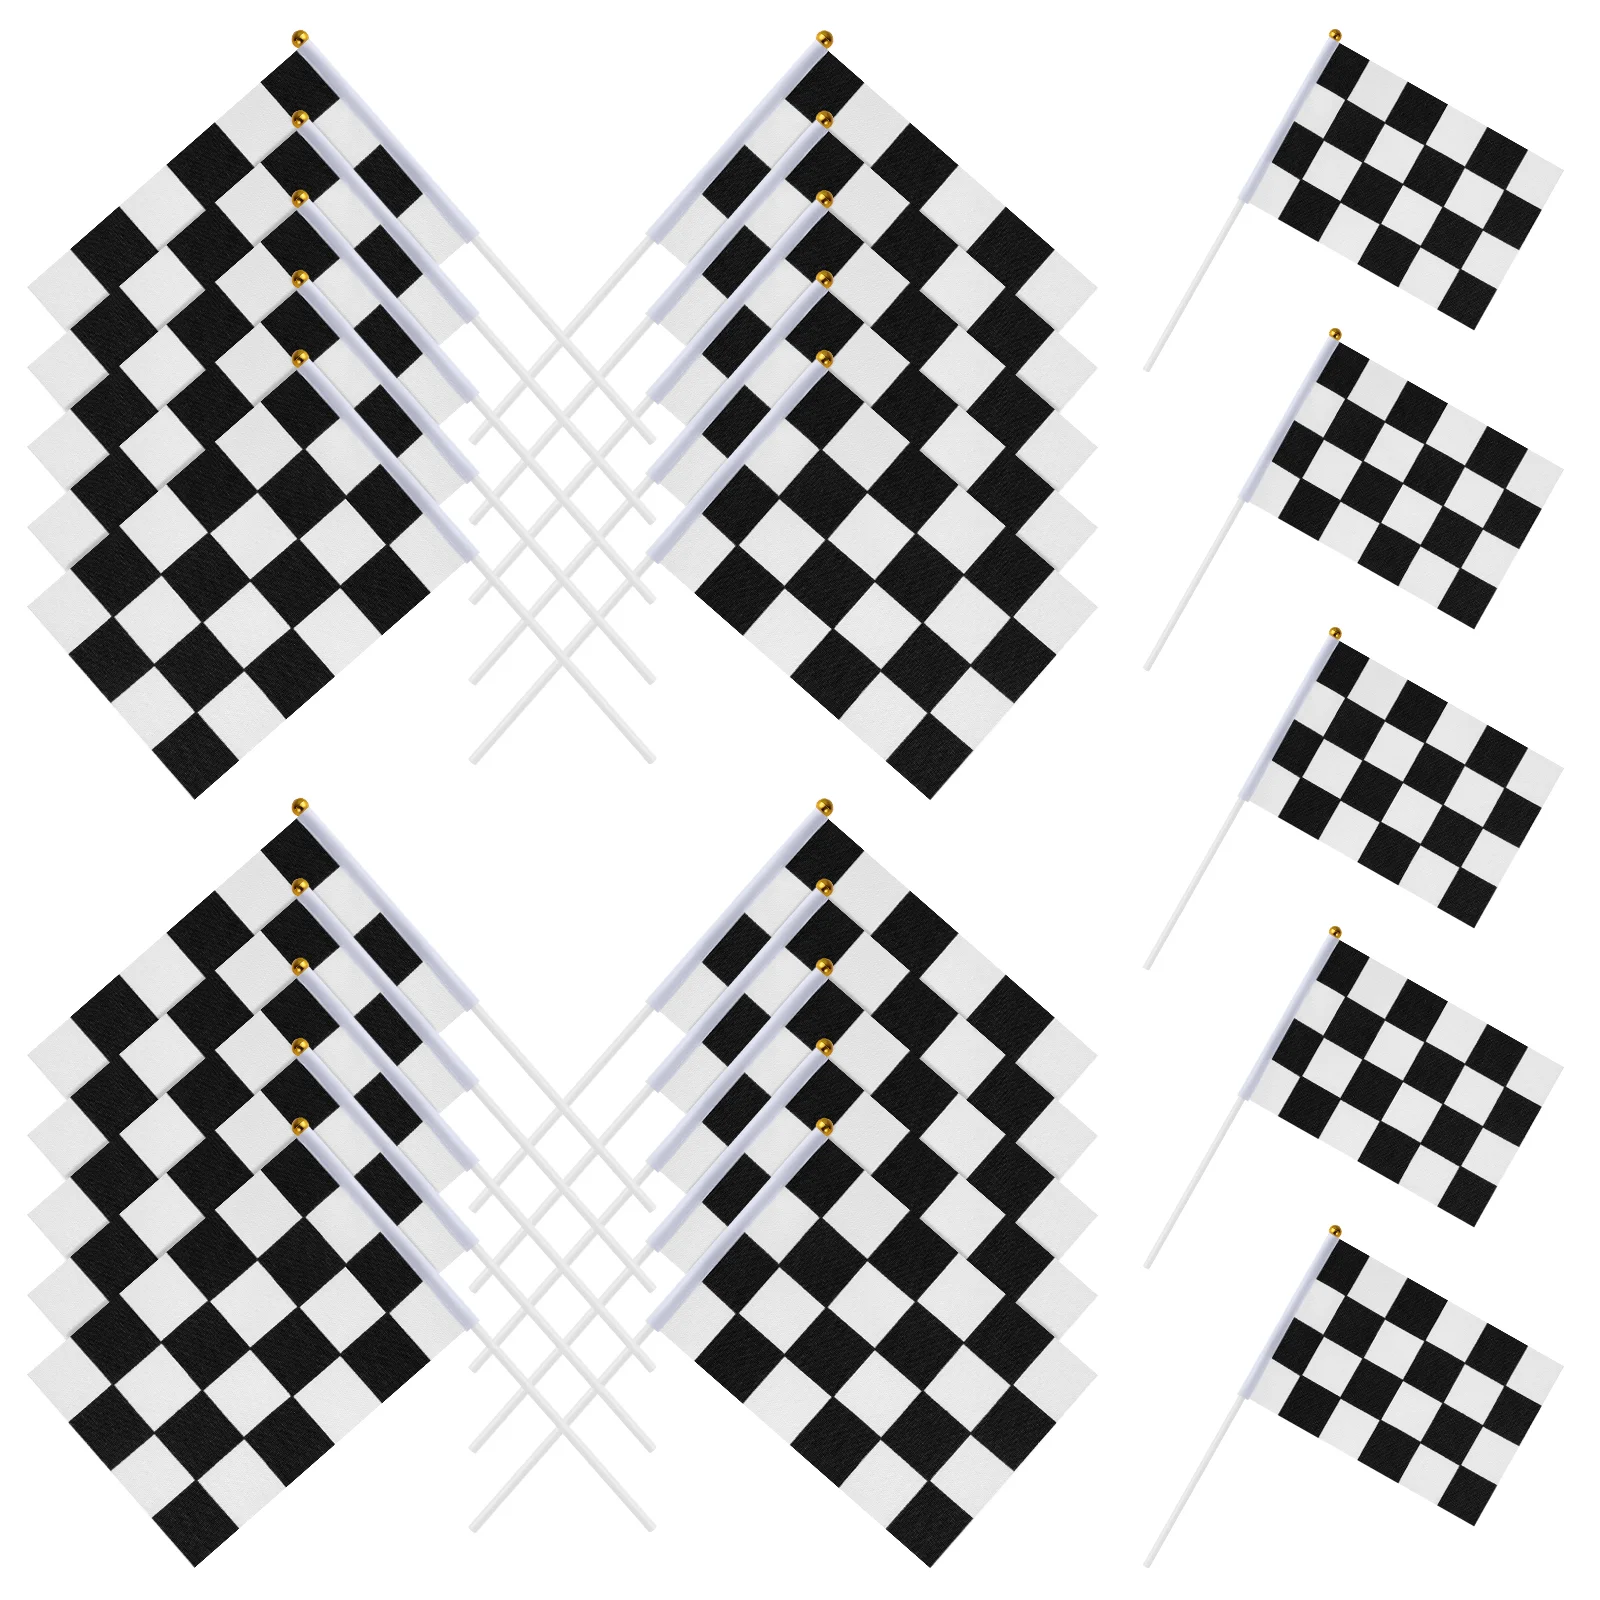 

25 Pcs Ornament Checkered Flag Racing Flags Grid Signal Black and White Match Party Car with Sticks Child